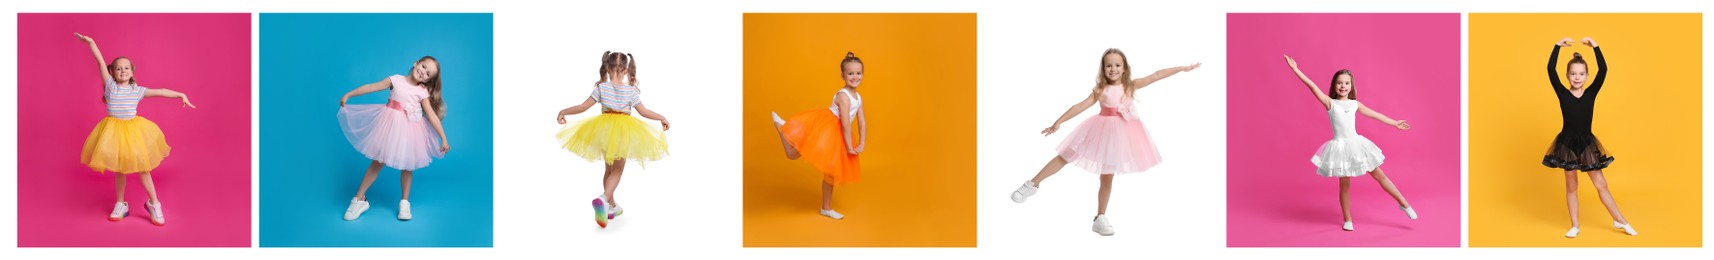 Collage with photos of cute little girls dancing on different color backgrounds. Banner design